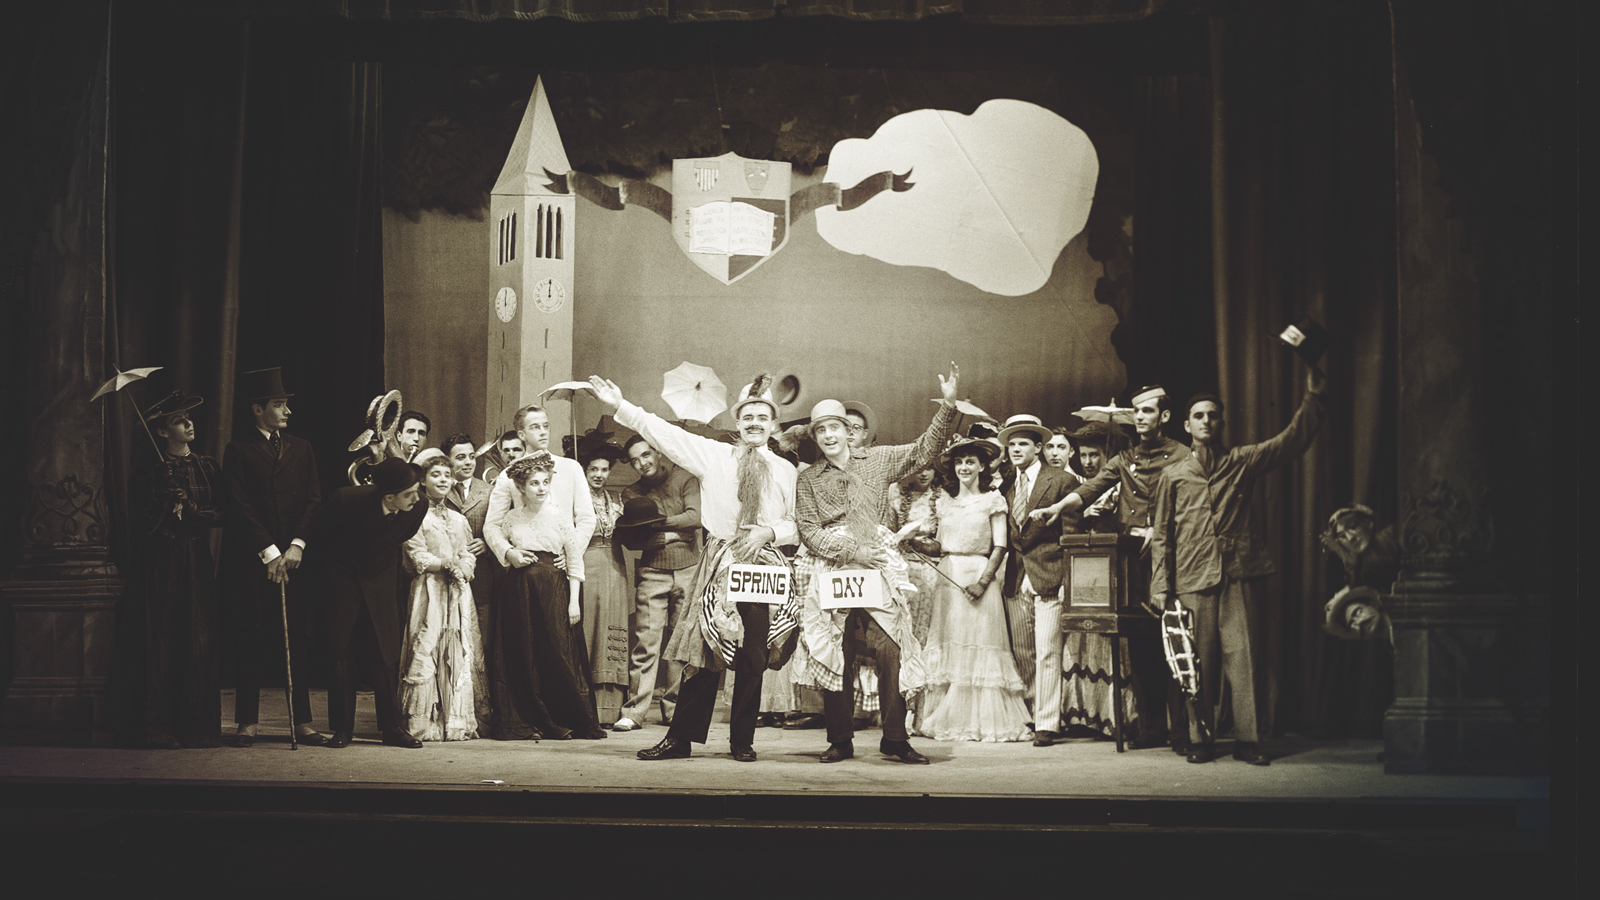 Cornell’s first Spring Day as reimagined on stage in the 1940s for the student musical “Once Upon a Hill”